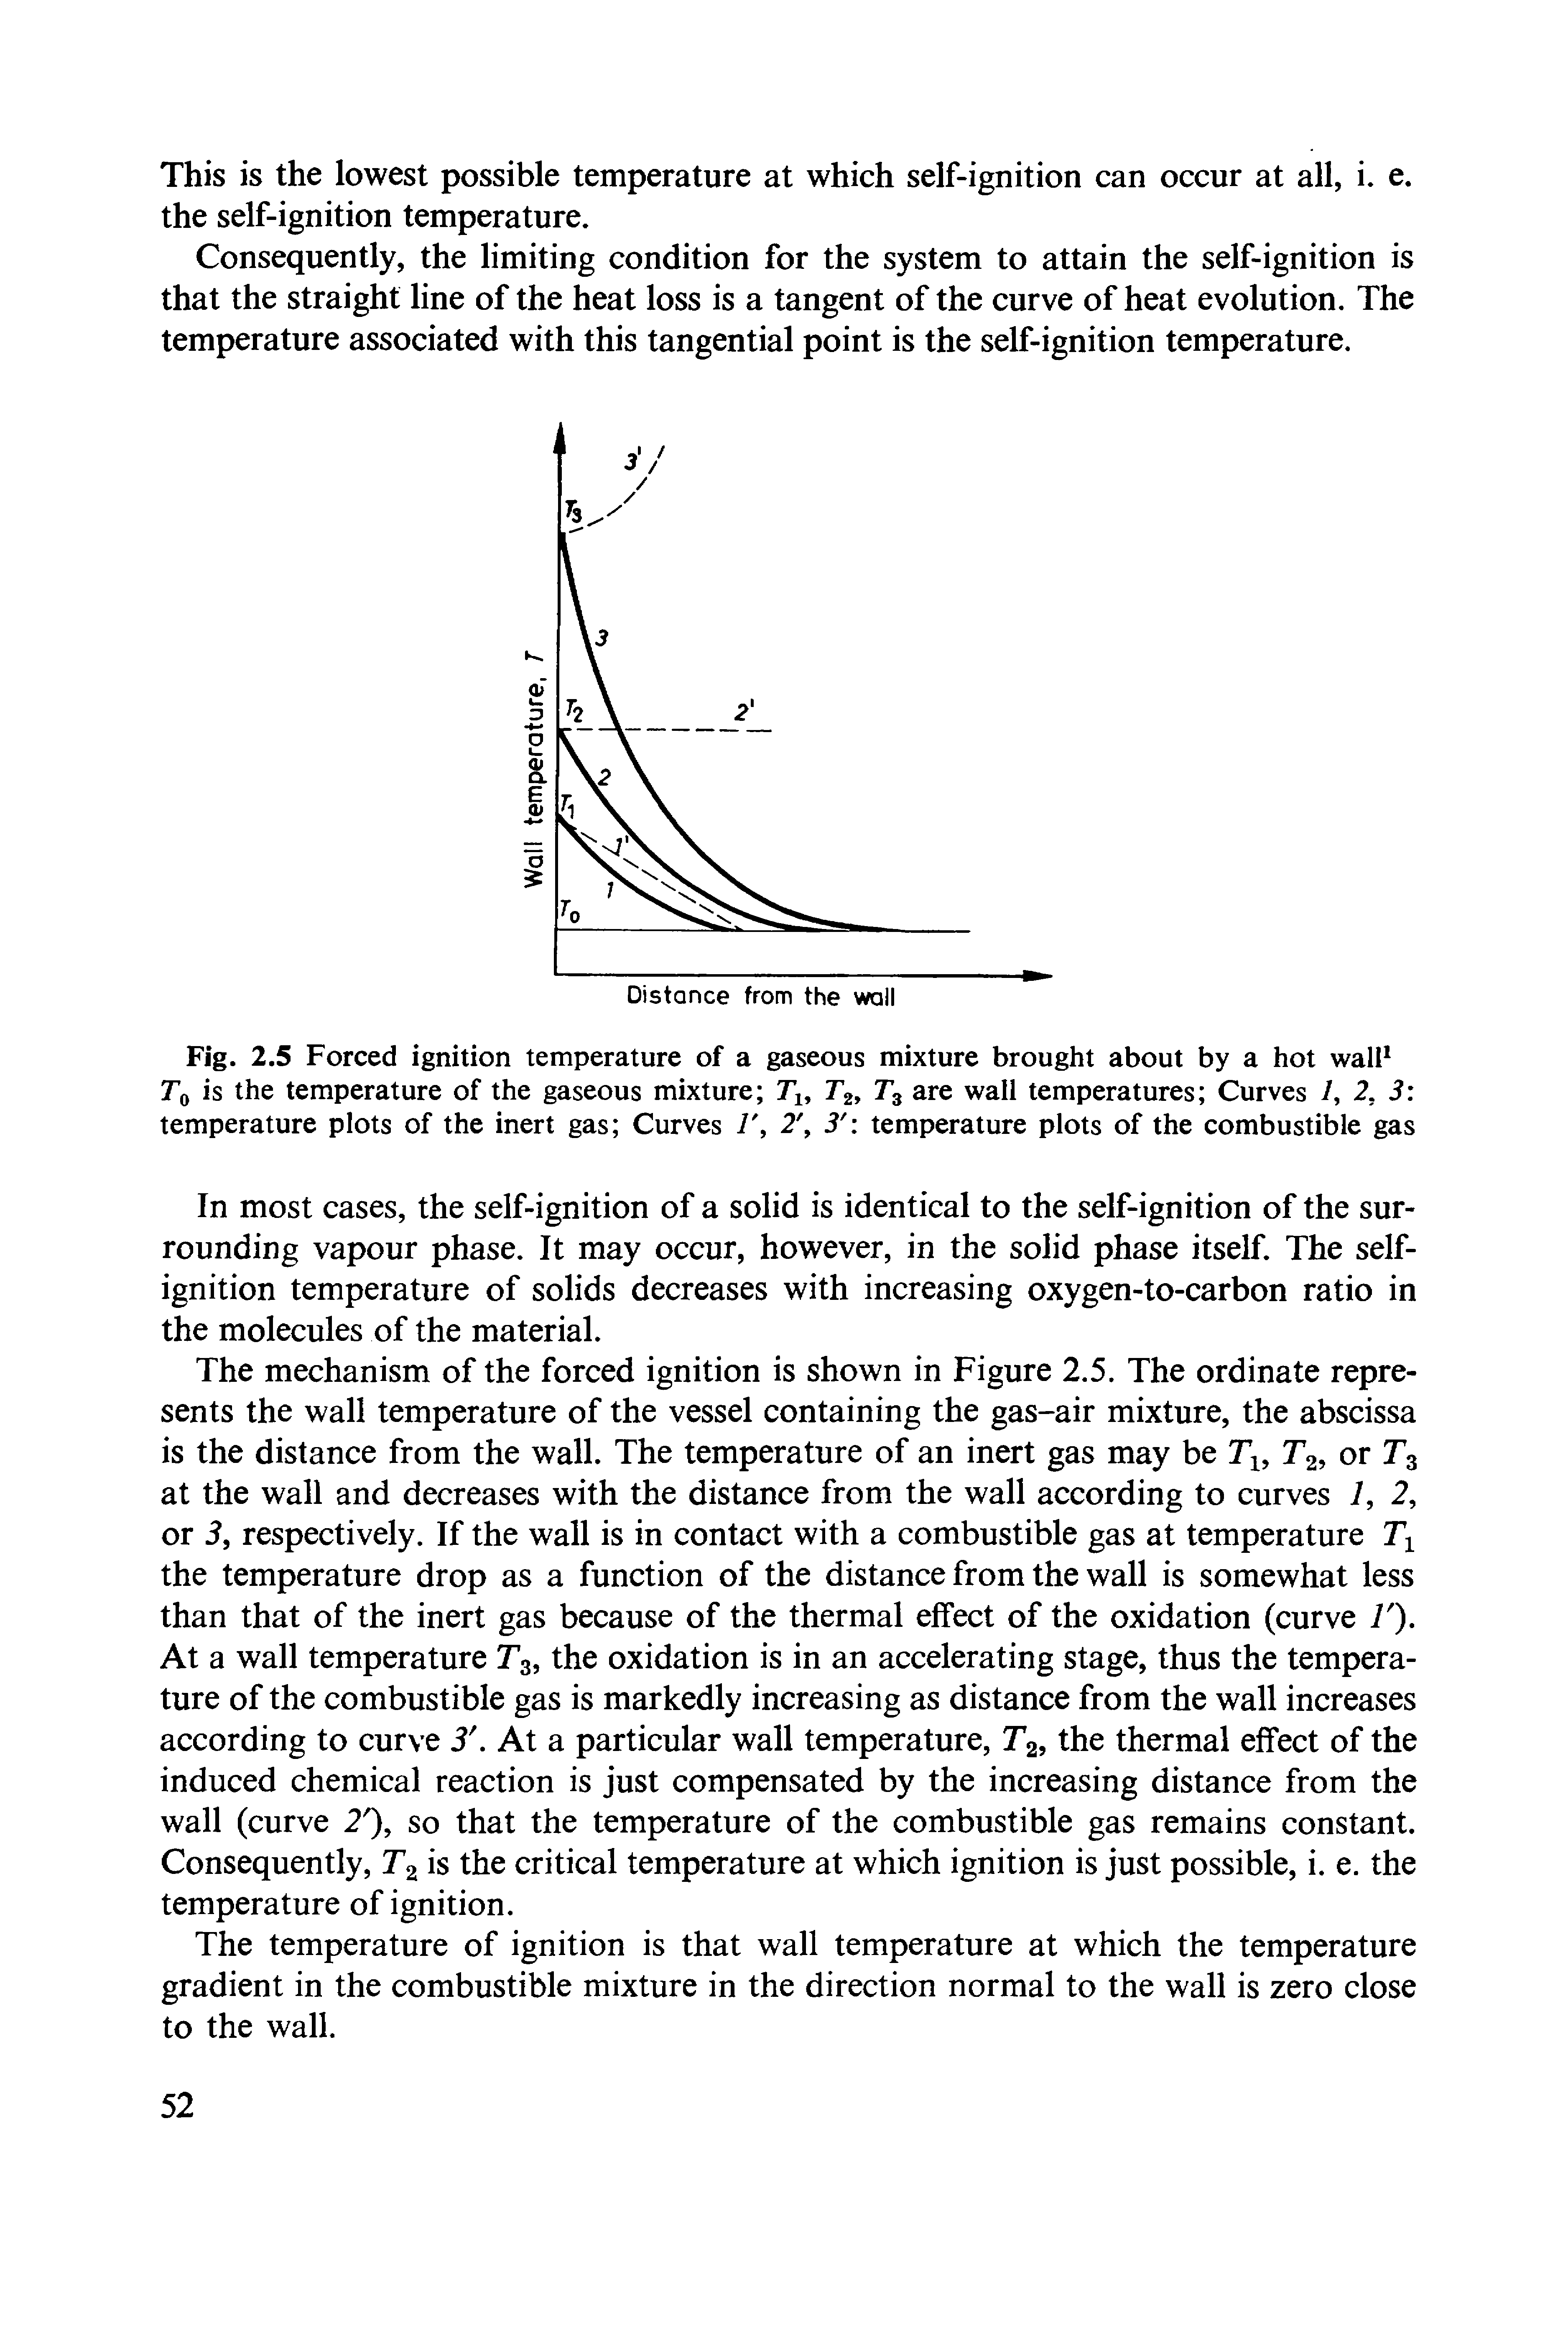 Fig. 2.5 Forced ignition temperature of a gaseous mixture brought about by a hot walF Tq is the temperature of the gaseous mixture Tg, are wall temperatures Curves /, 2, 3 temperature plots of the inert gas Curves 1 2 3 temperature plots of the combustible gas...